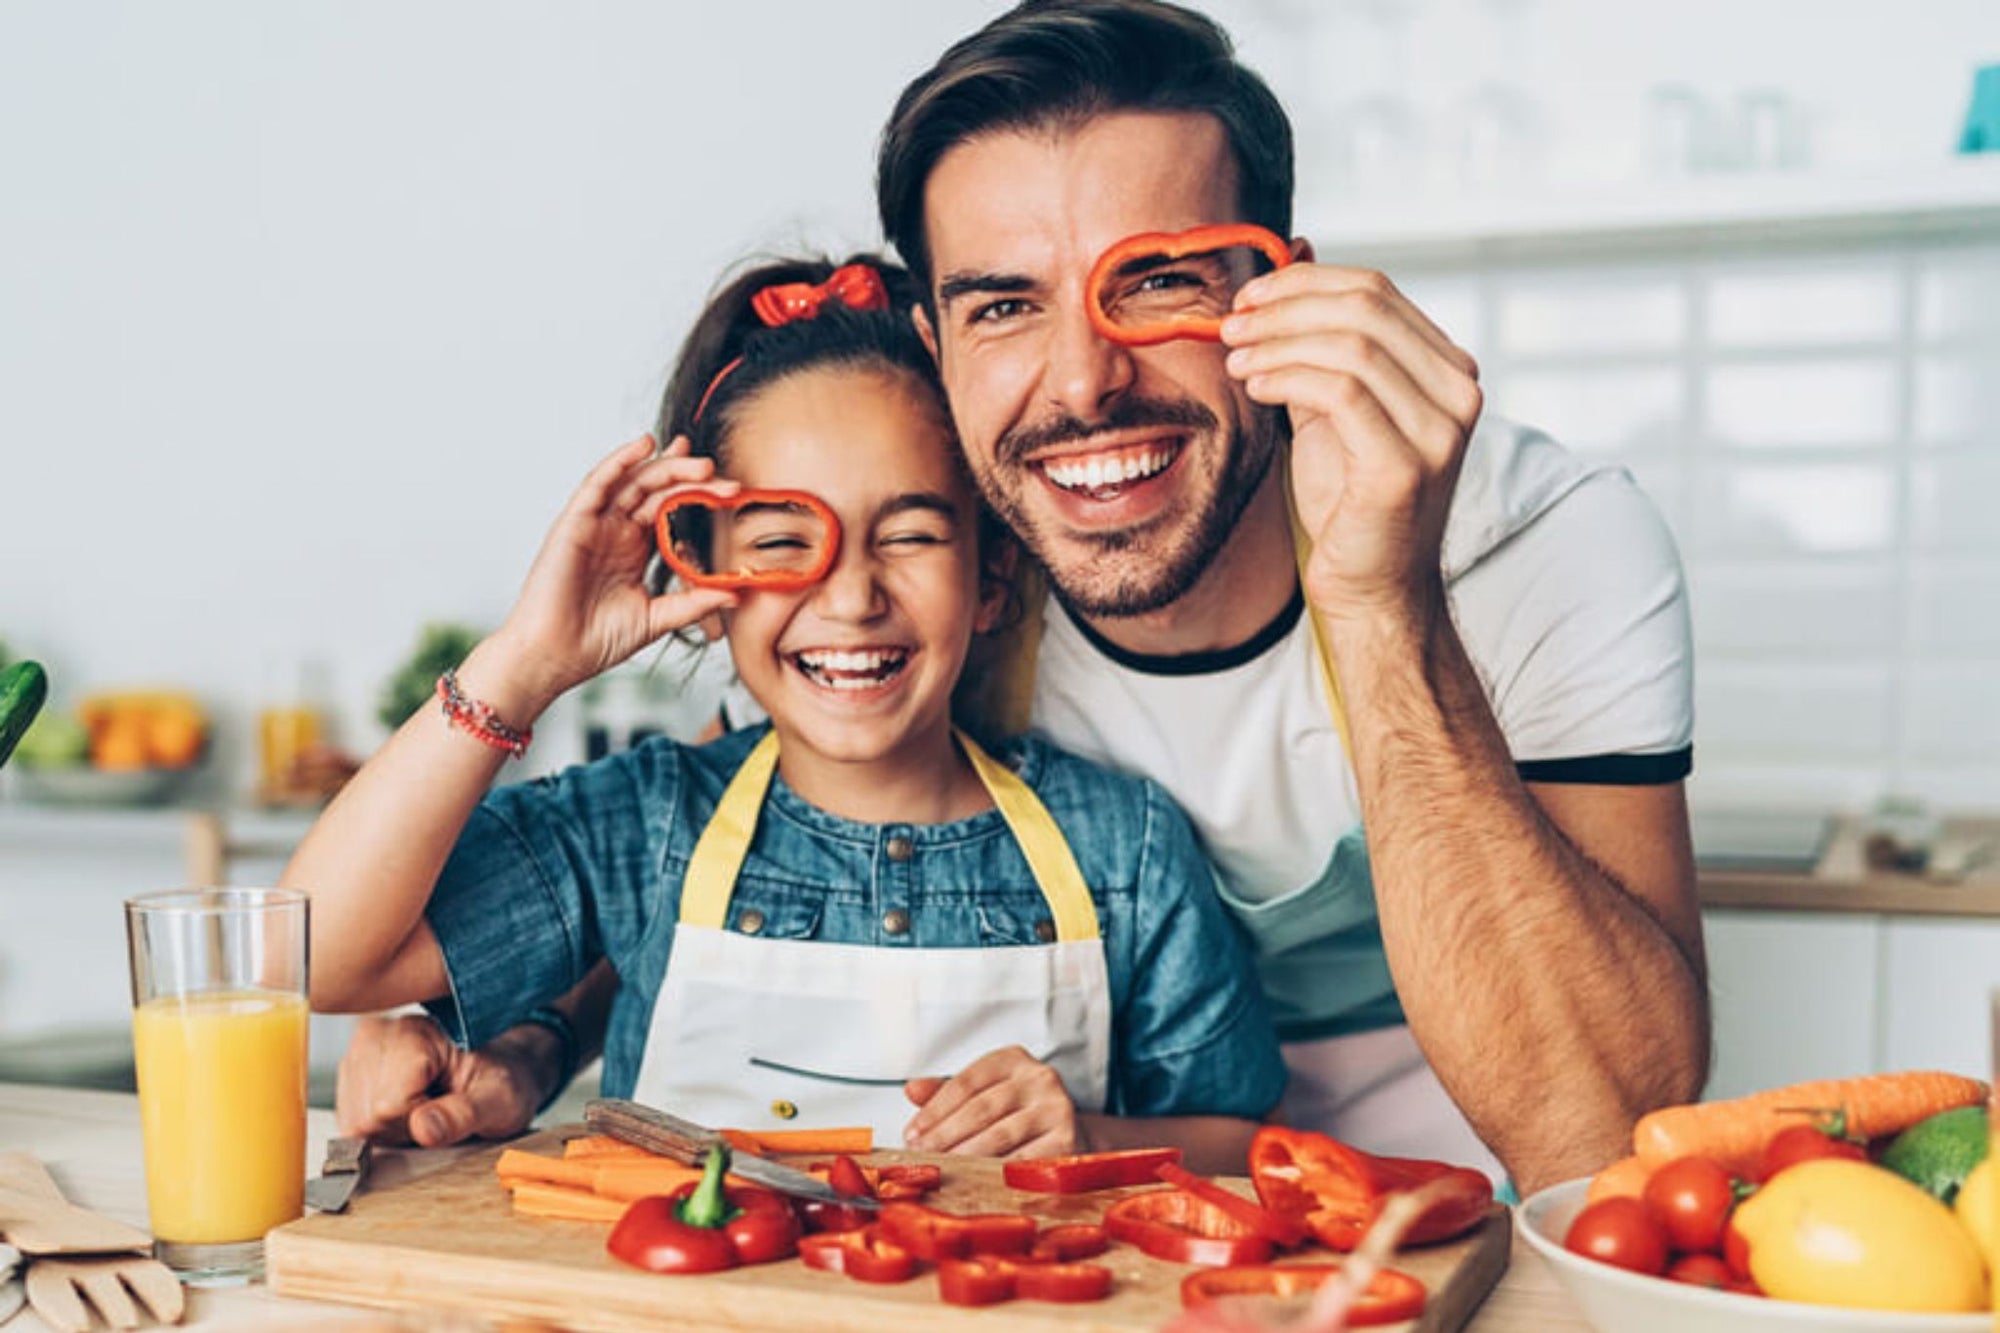 Fruits and vegetables provide key nutrients for eye health